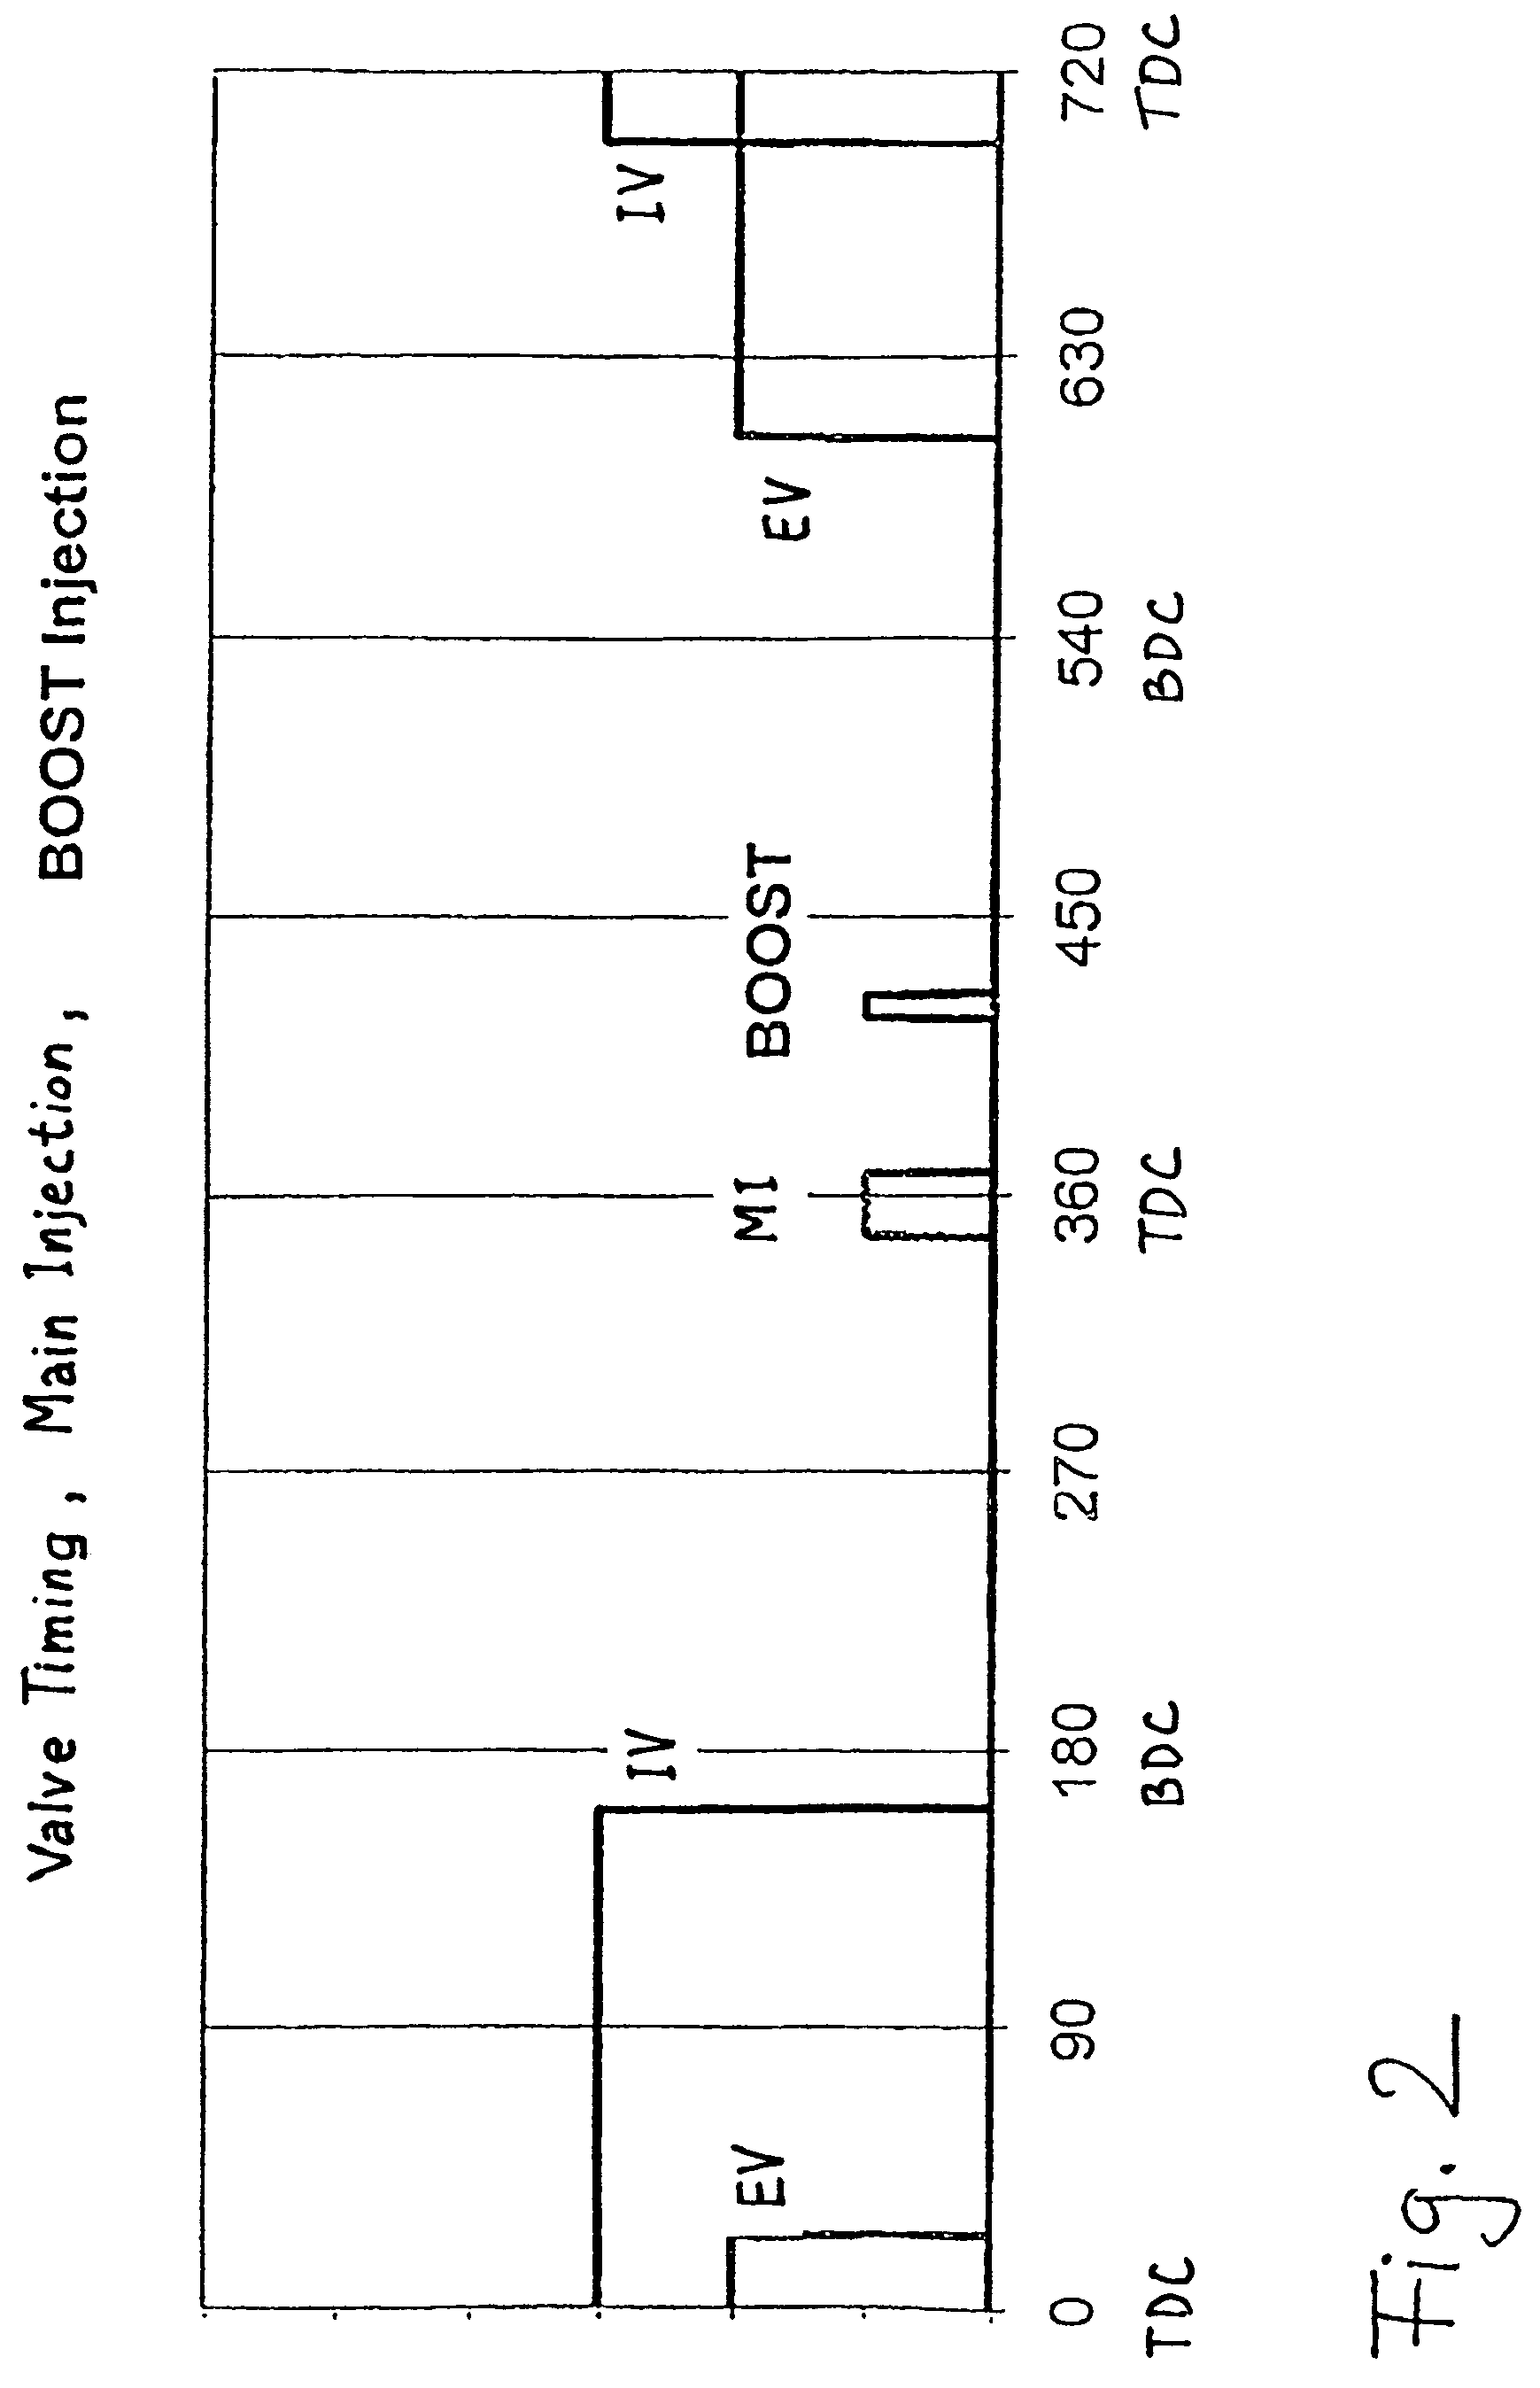 Method for optimizing the operating mode and combustion processes of a diesel engine